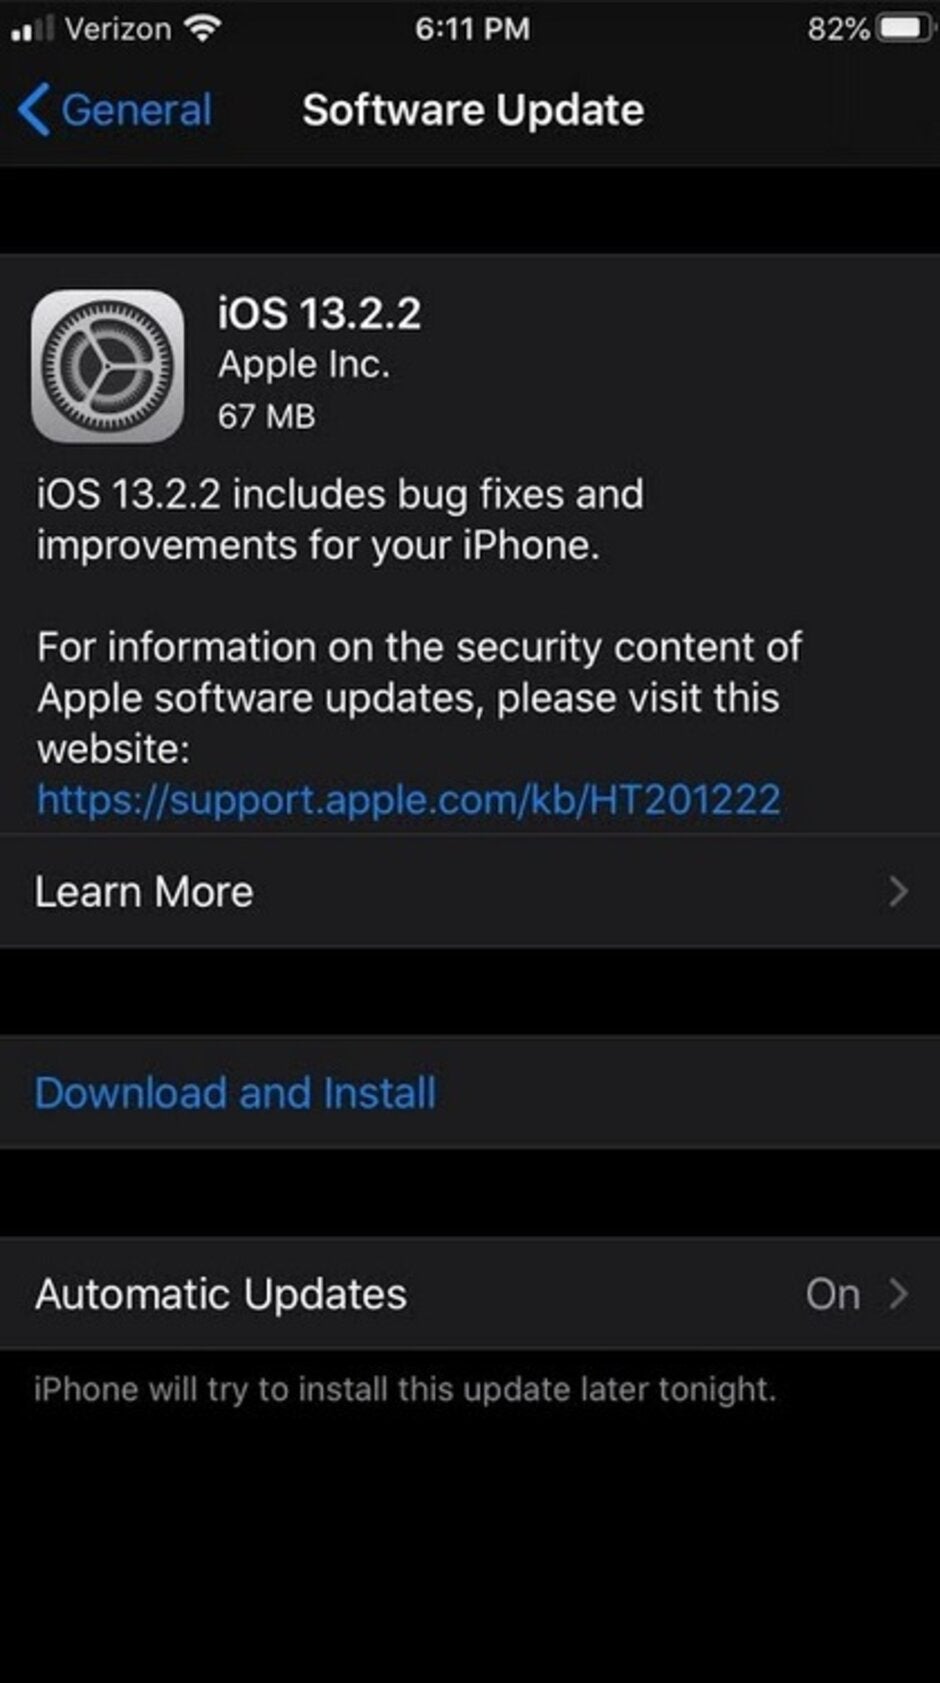 Apple drops iOS and iPadOS 13.2.2 - Update to iOS 13.2.2. brings multitasking back to the Apple iPhone